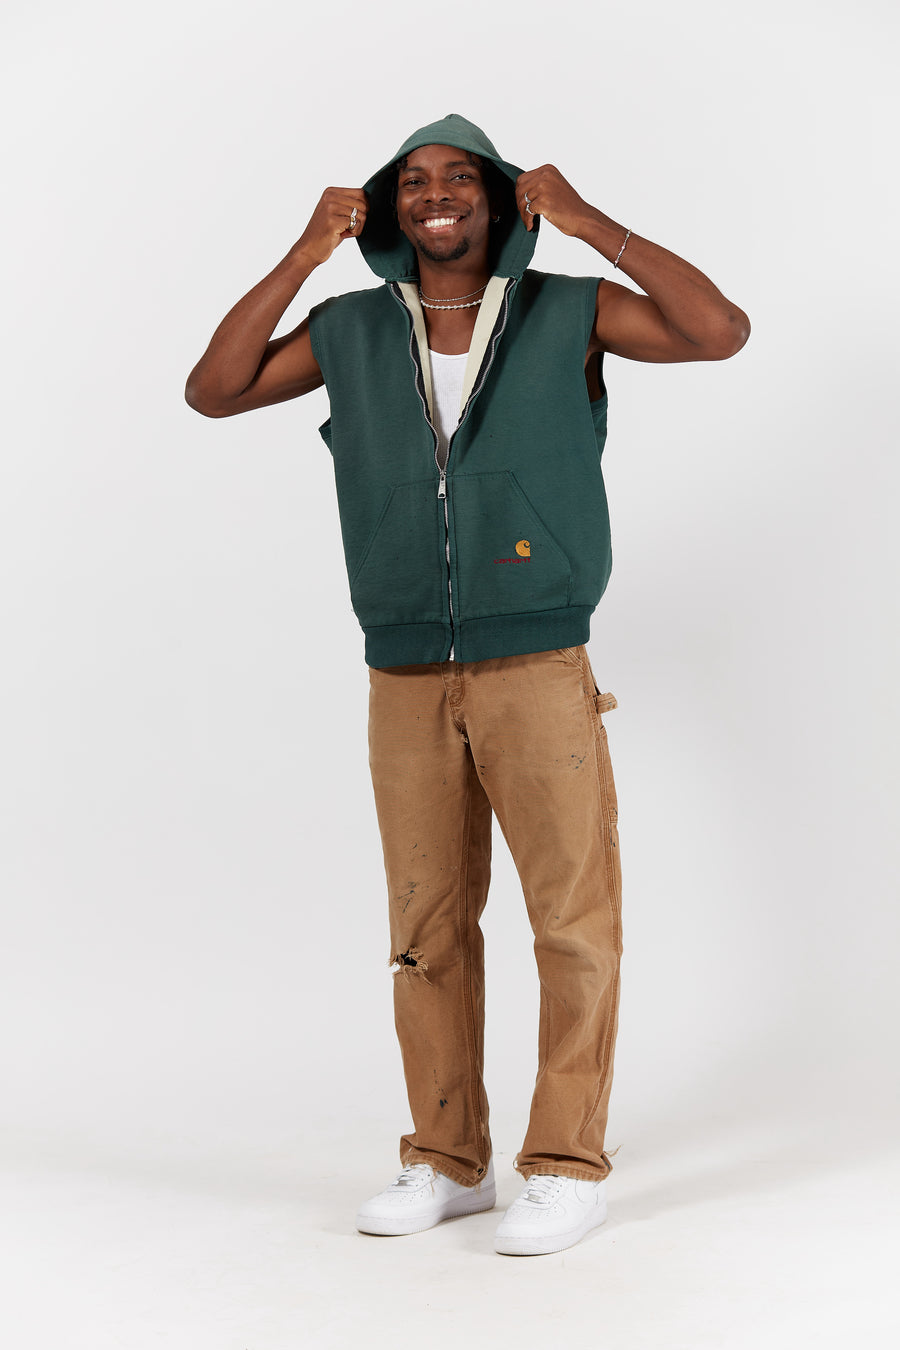 Carhartt Thermal Lined Hooded Vest in a vintage style from thrift store Twise Studio